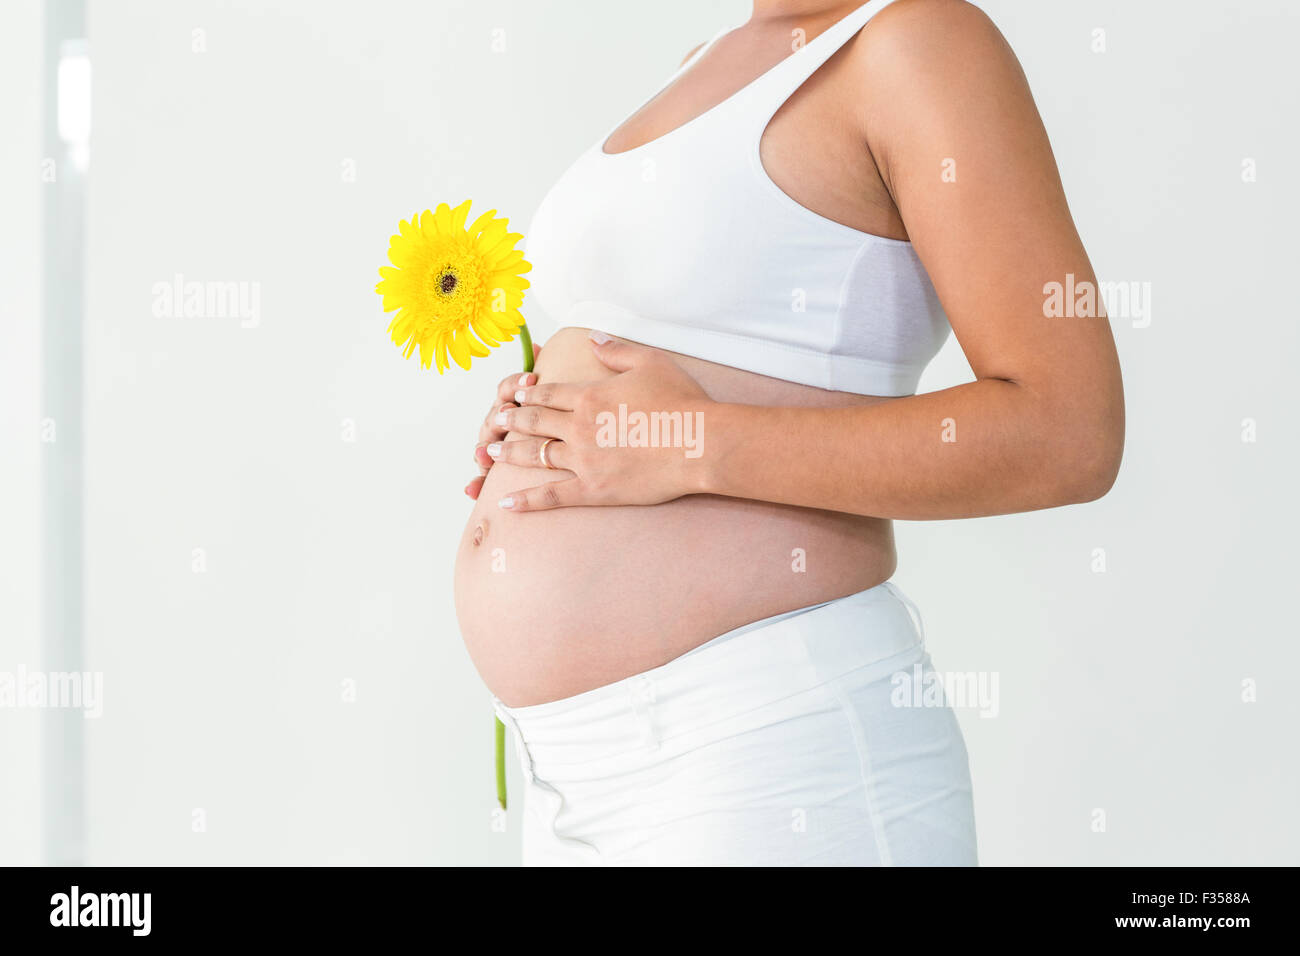 Pregnant woman touching her belly while holding yellow flower Stock Photo